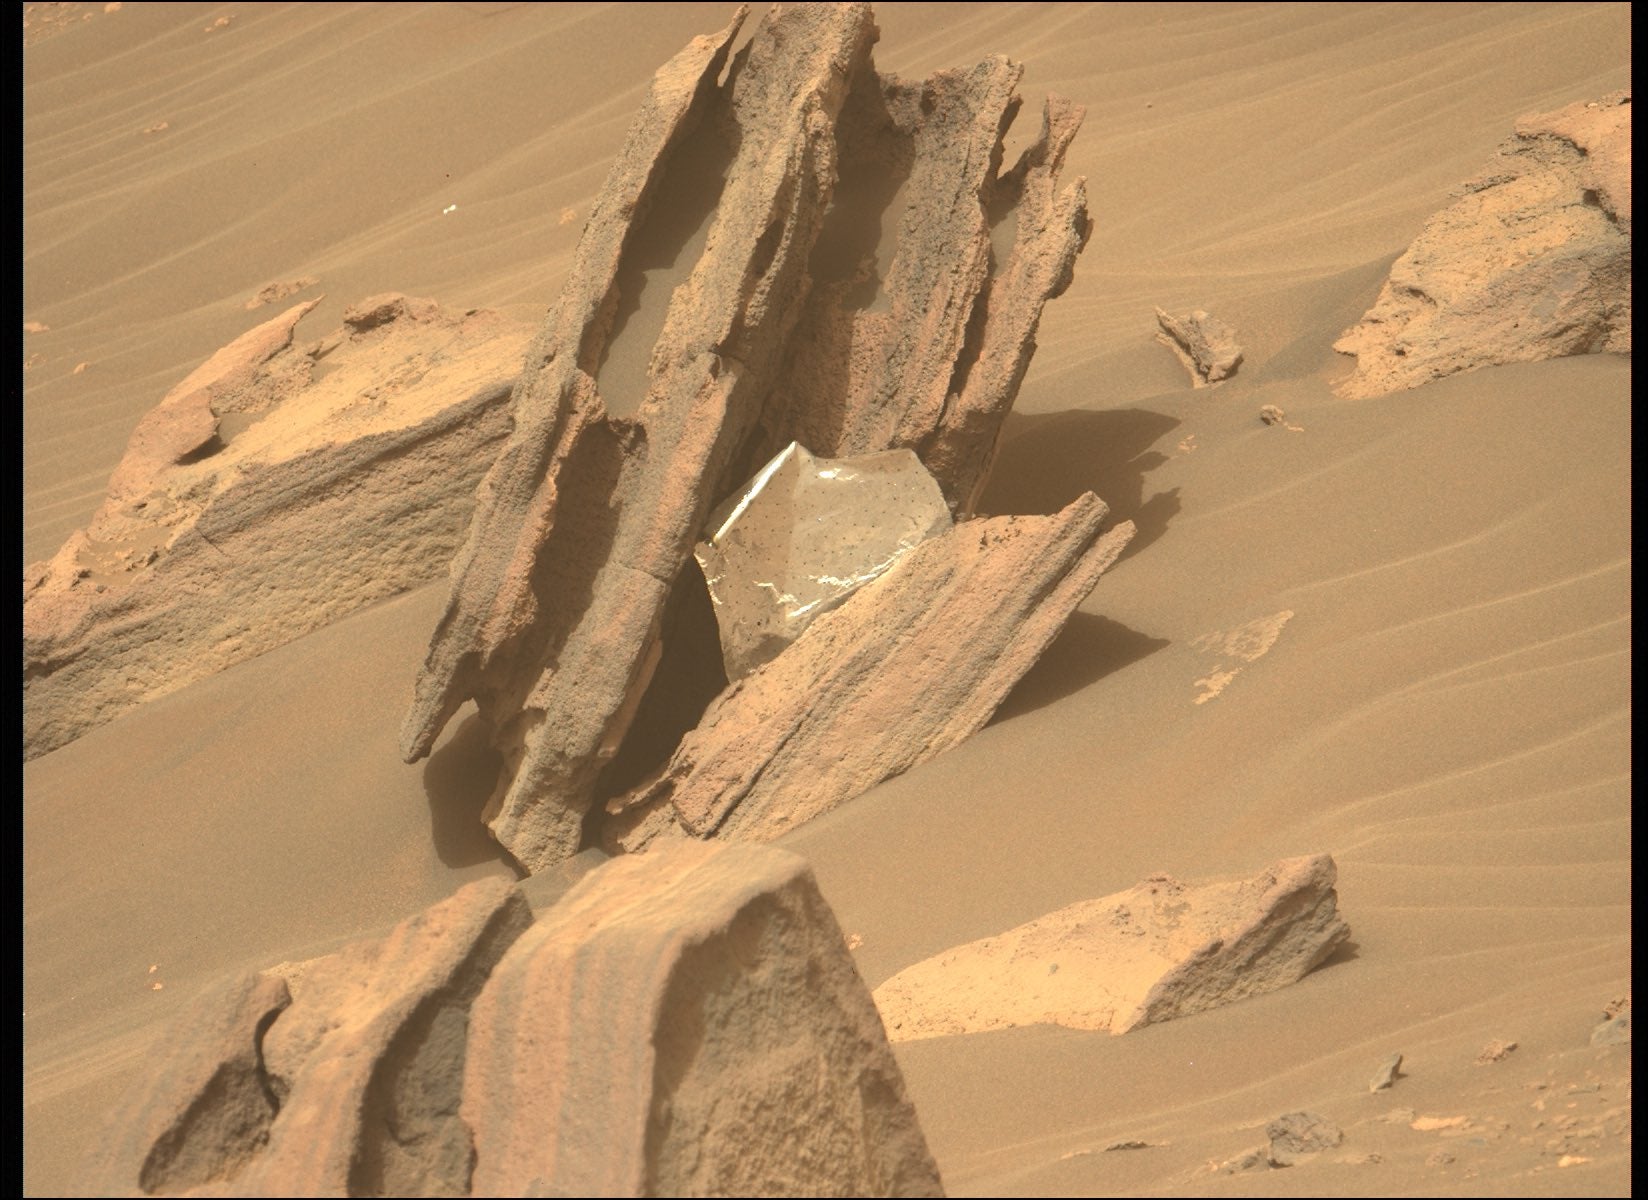 Nasa’s Perseverance rover just stumbled across a piece of foil from the descent stage that brought the rover to the Red Planet in 2021.